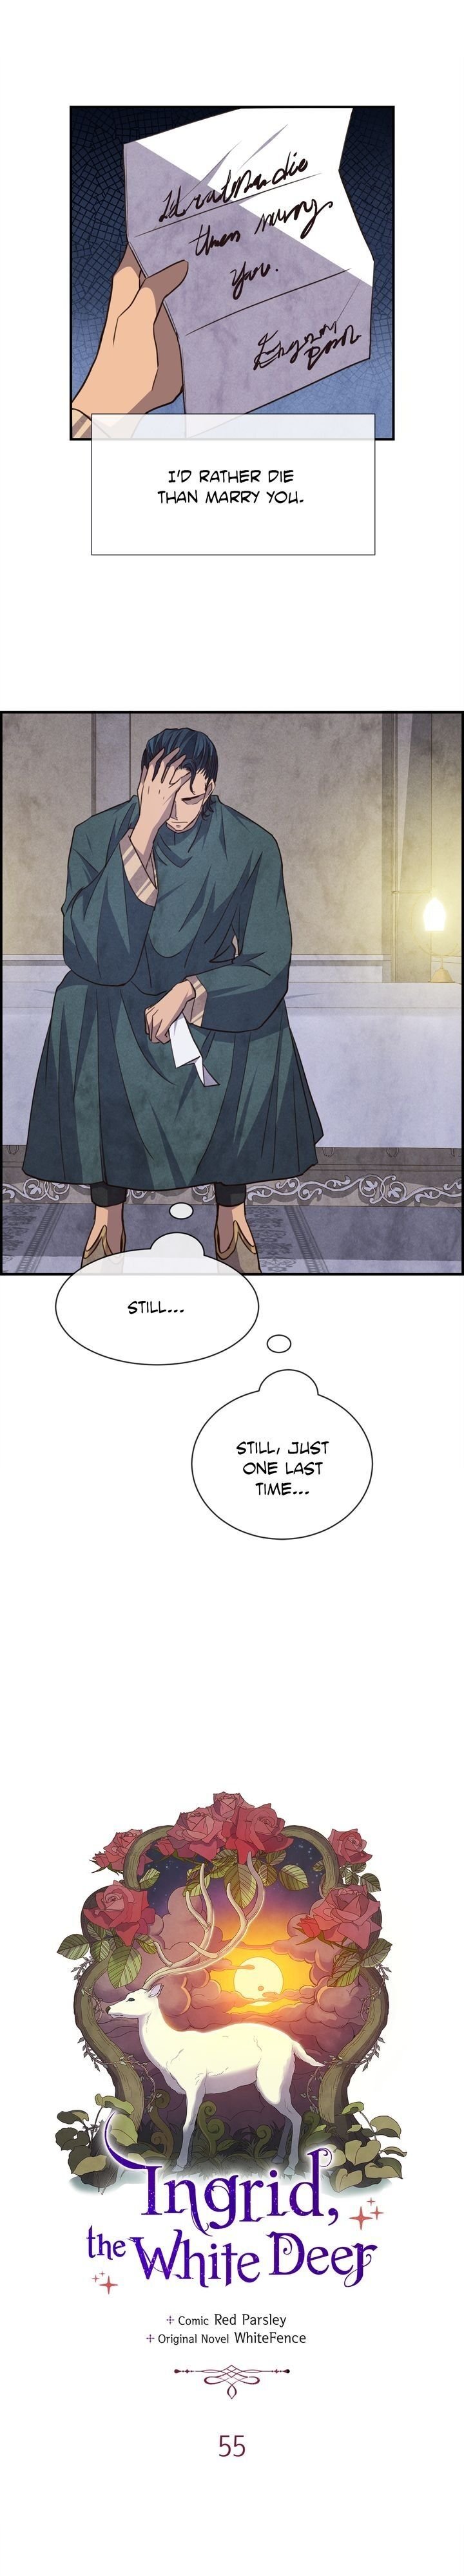 Ingrid, the White Deer Chapter 55 - Page 1